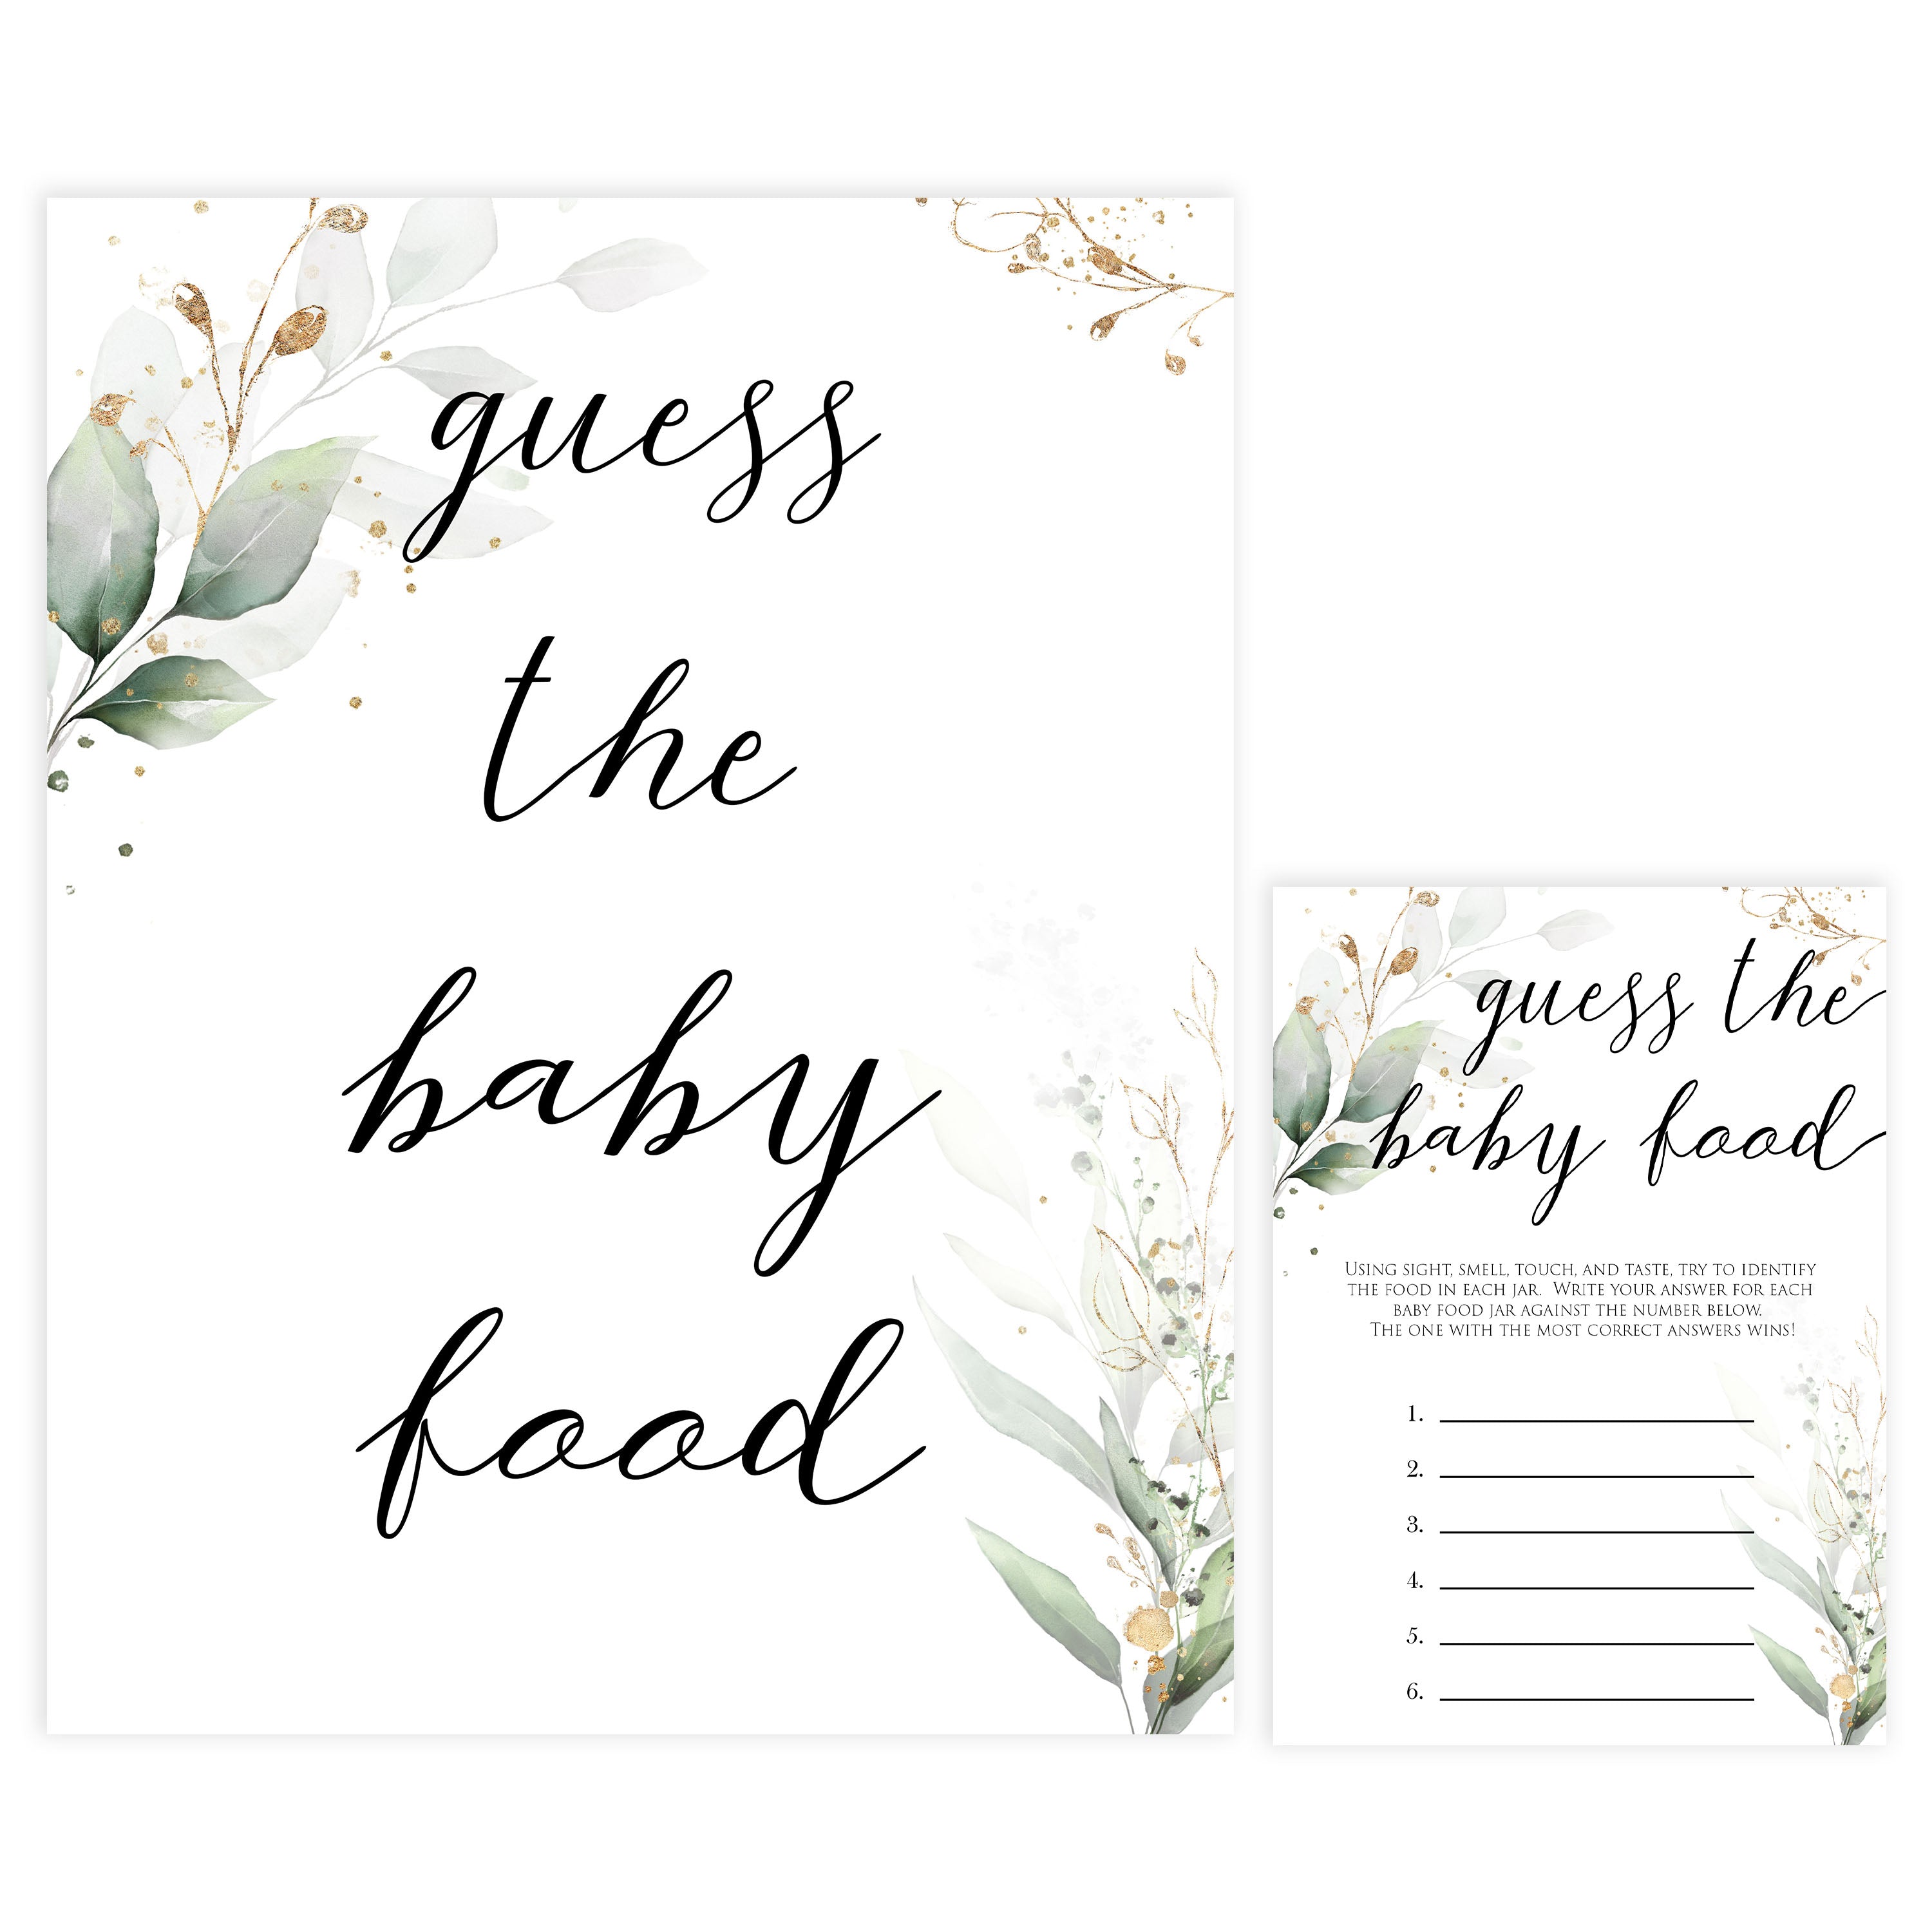 Gold green leaf baby games, guess the baby food, printable baby games, fun baby games, top baby games to play, gold leaf baby shower, greenery baby shower ideas